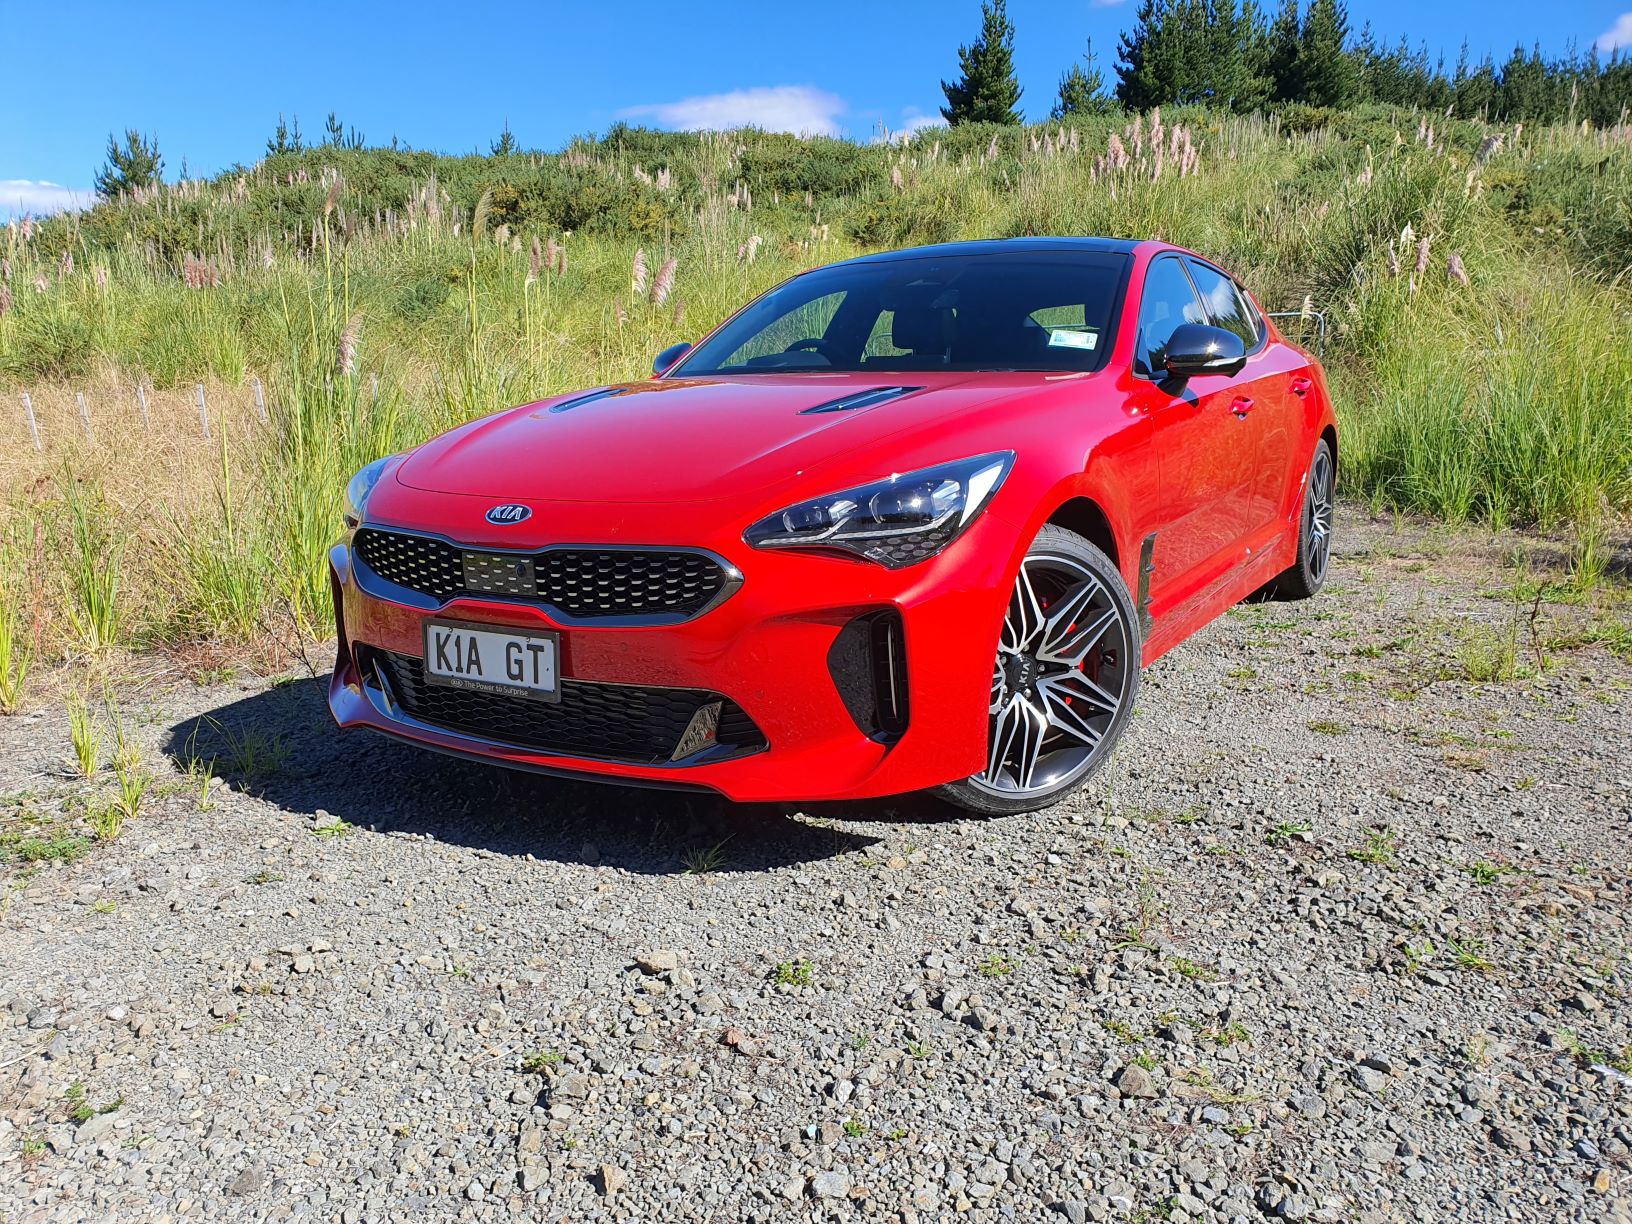 Front view of the 2021 Kia Stinger GT